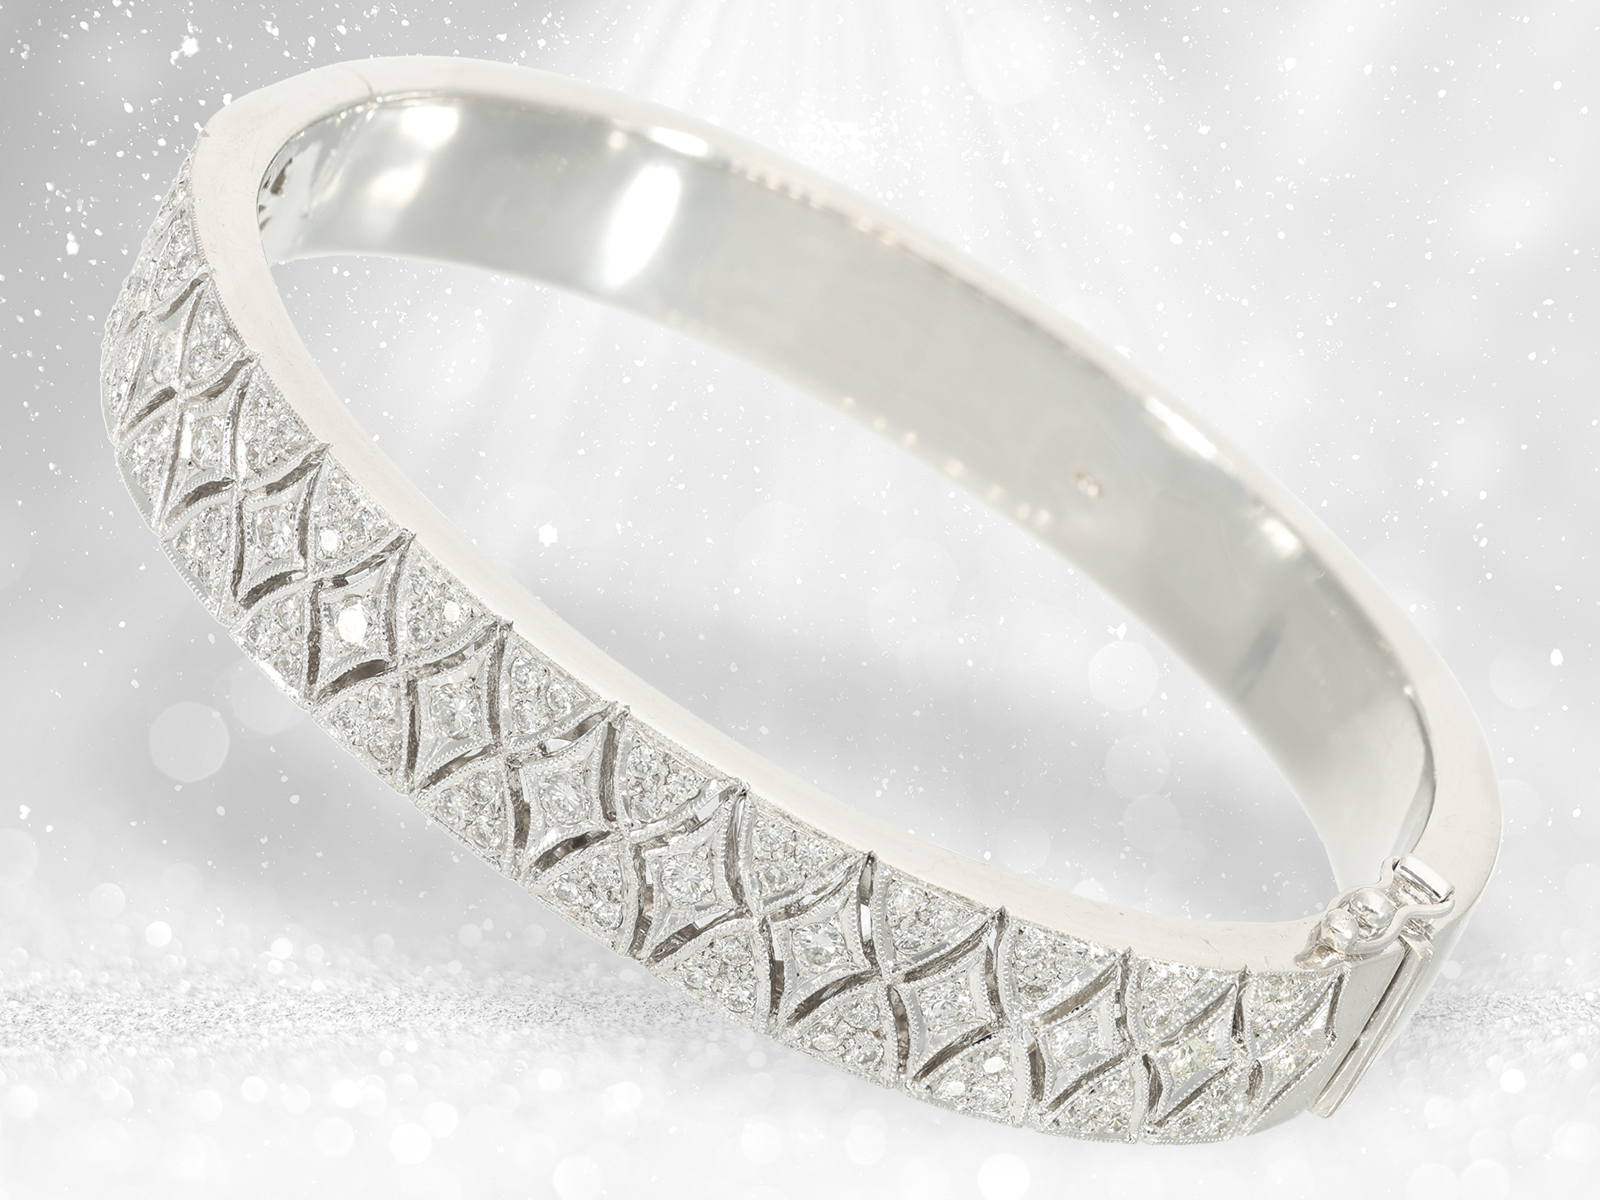 Heavy and high quality white gold bracelet with high quality brilliant-cut diamonds, approx. 1.2ct - Image 3 of 4